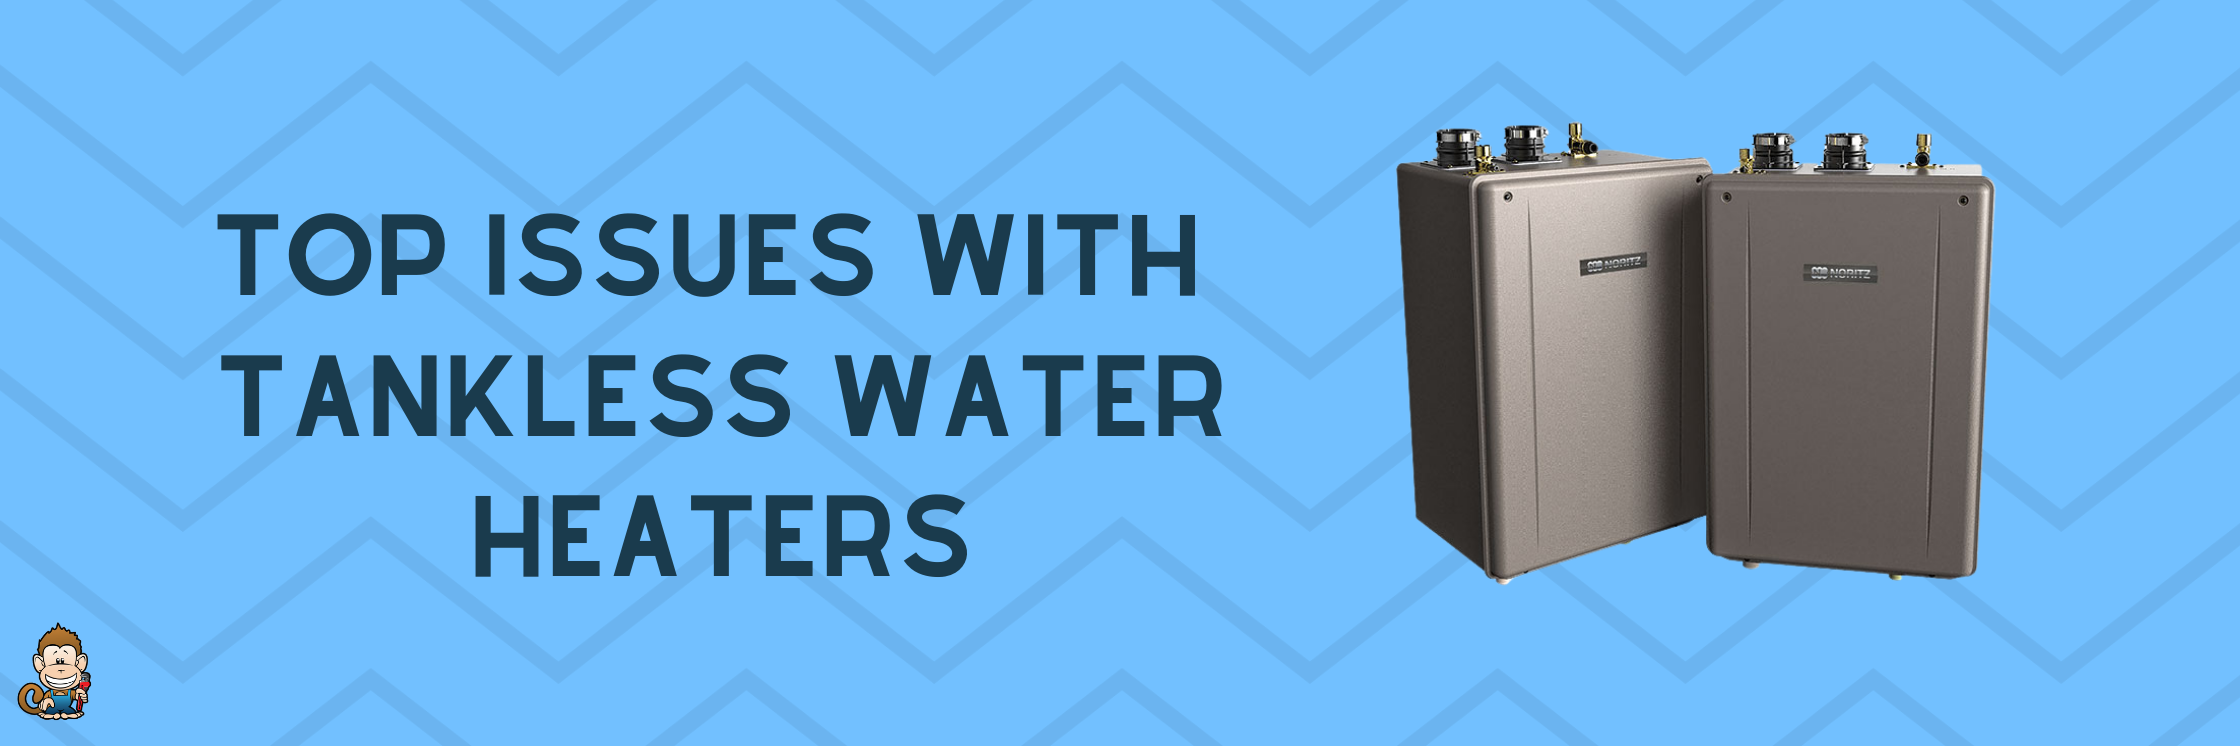 Top Issues With Tankless Water Heaters